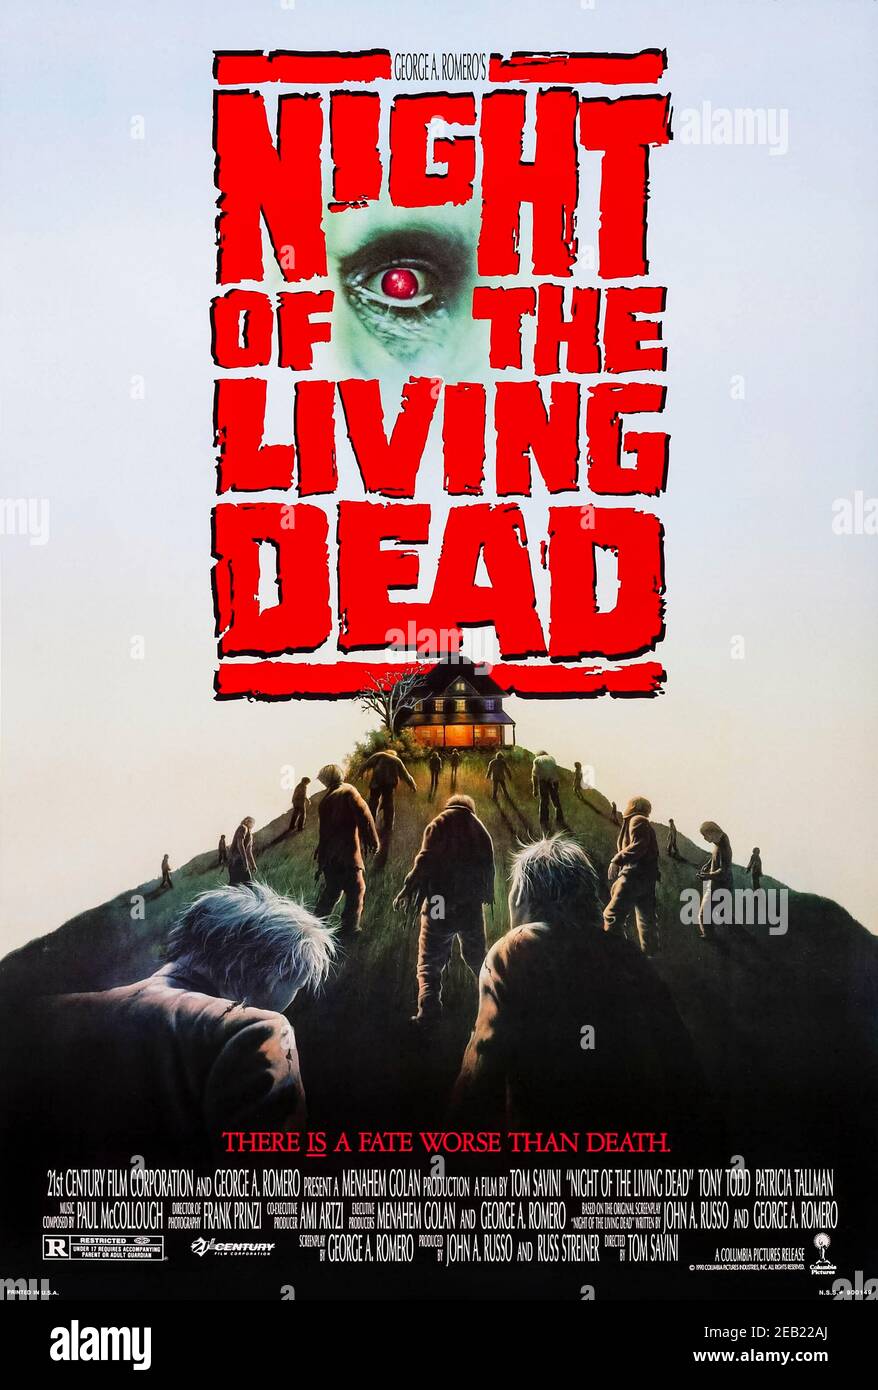 Night of the Living Dead (1990) directed by Tom Savini and starring Tony Todd, Patricia Tallman and Tom Towles . Remake of George A. Romero's classic 1968 zombie movie, a group in a house in the Pennsylvanian countryside try to deal with the unburied dead who have returned to life and now seek human victims! Stock Photo